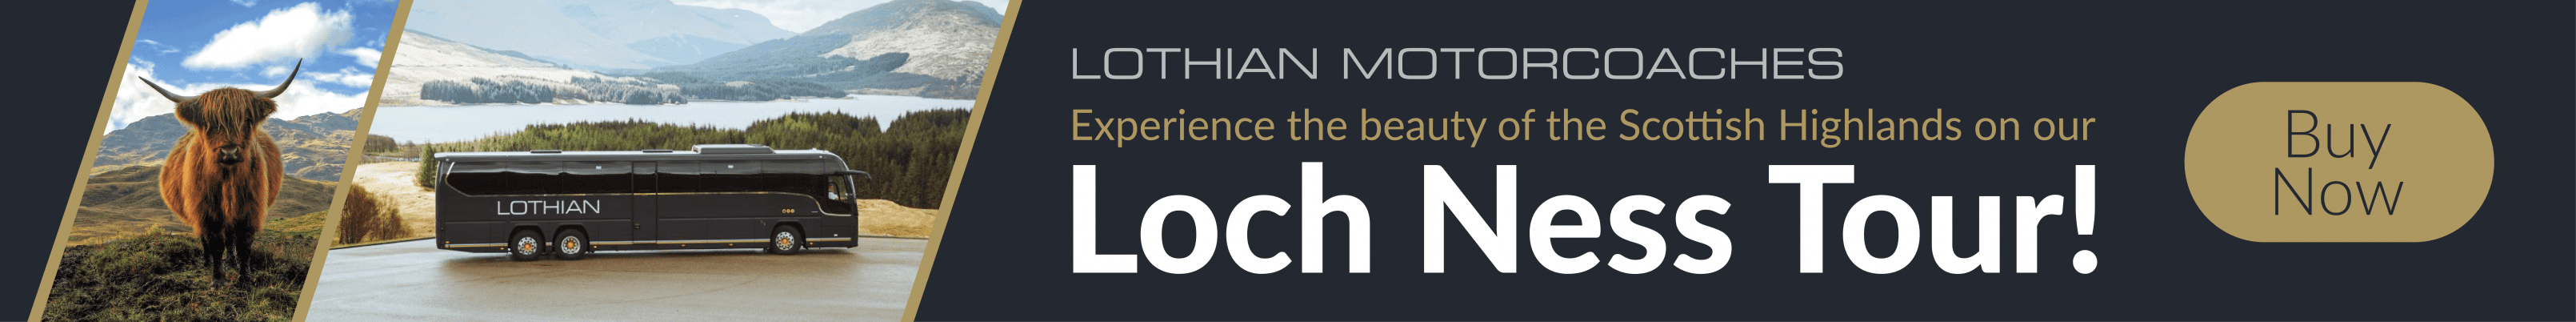 Lothian Motorcoaches: Experience the beauty of the Scottish Highlands on our Loch Ness Tour! Click to Buy Now. 